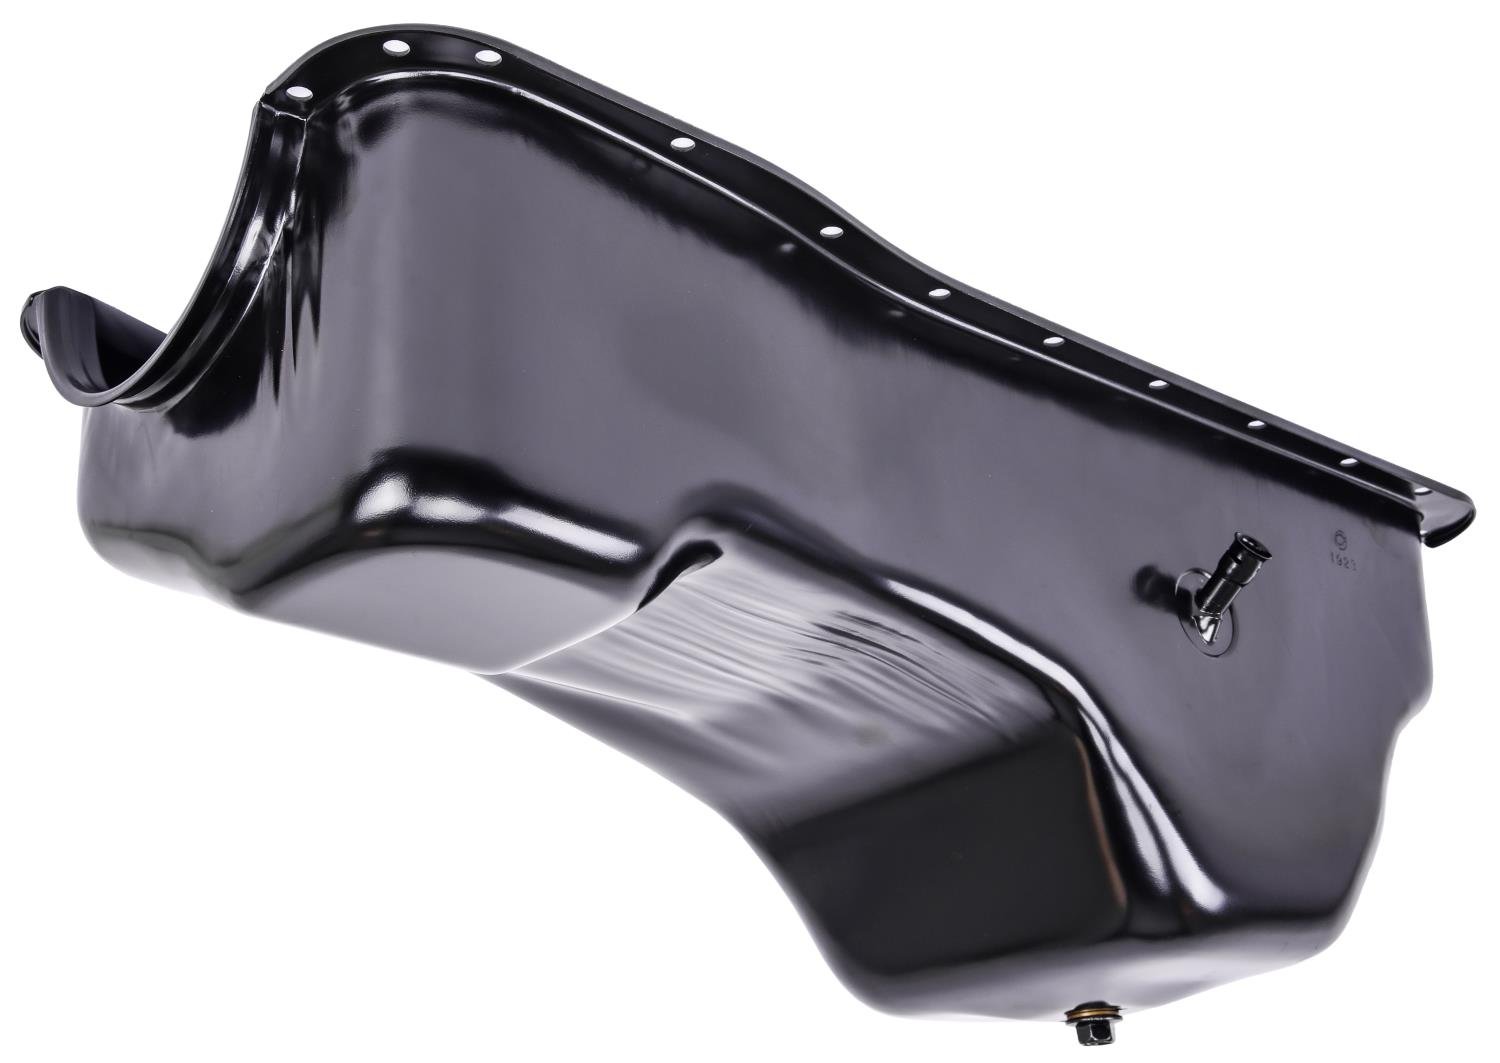 Stock Replacement Oil Pan for Select 1993-1997 Ford F-Series Trucks 460 ci/7.5L